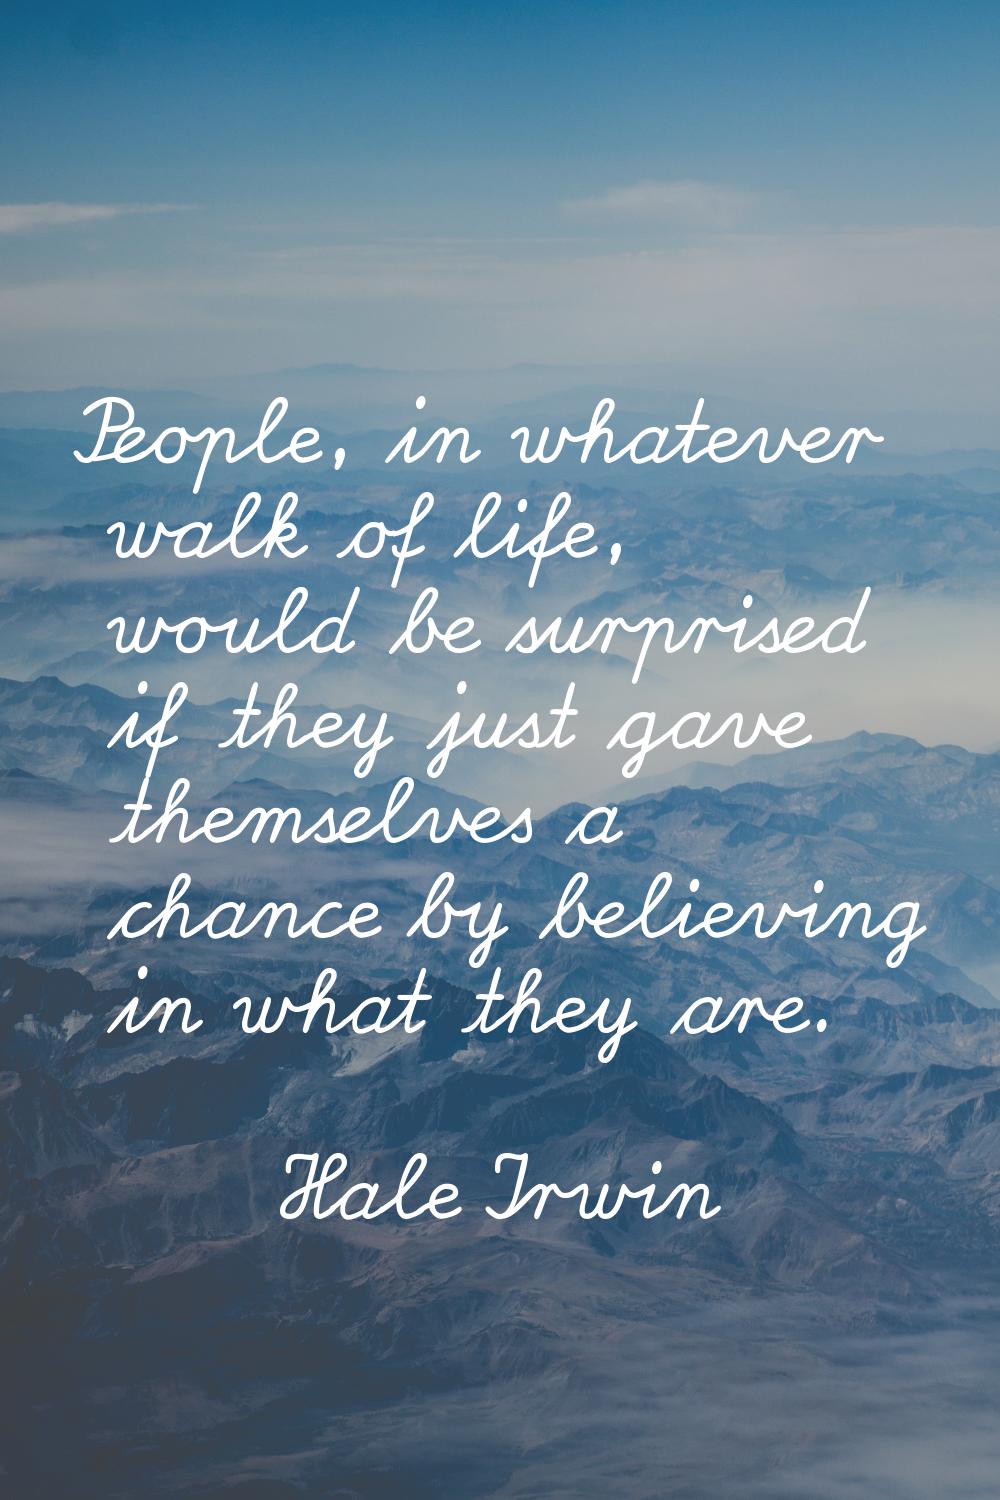 People, in whatever walk of life, would be surprised if they just gave themselves a chance by belie